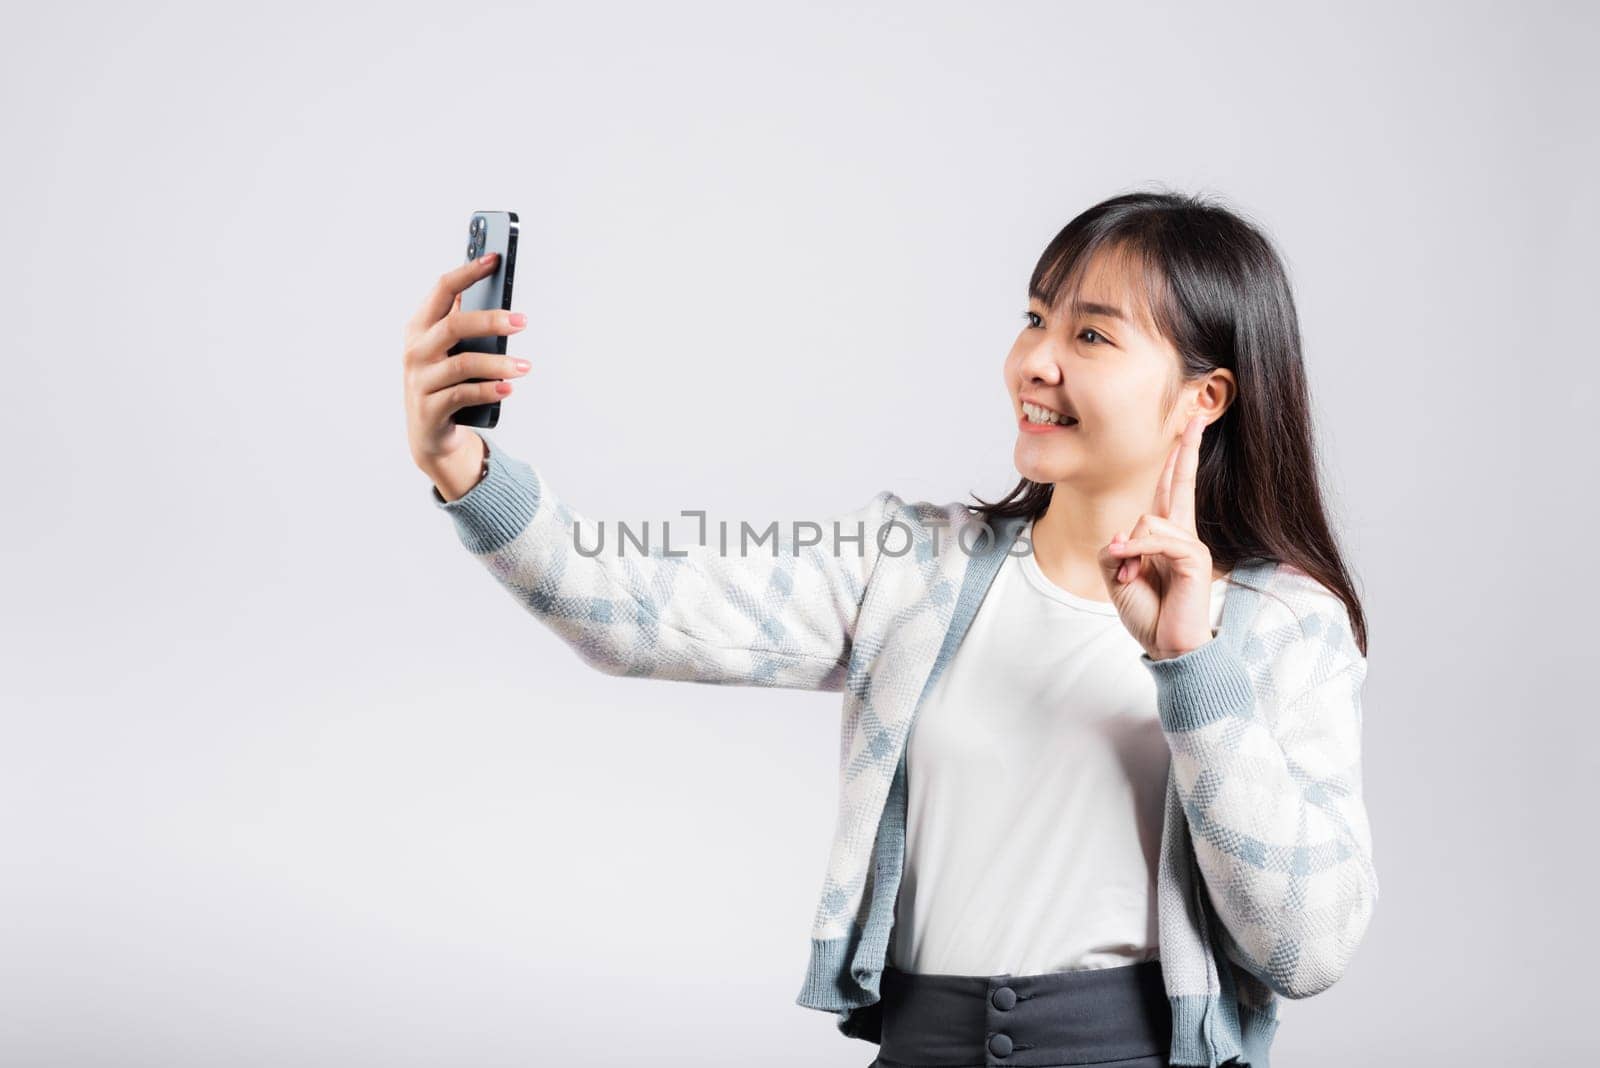 Woman excited holding smartphone to shooting selfie photo front camera by Sorapop